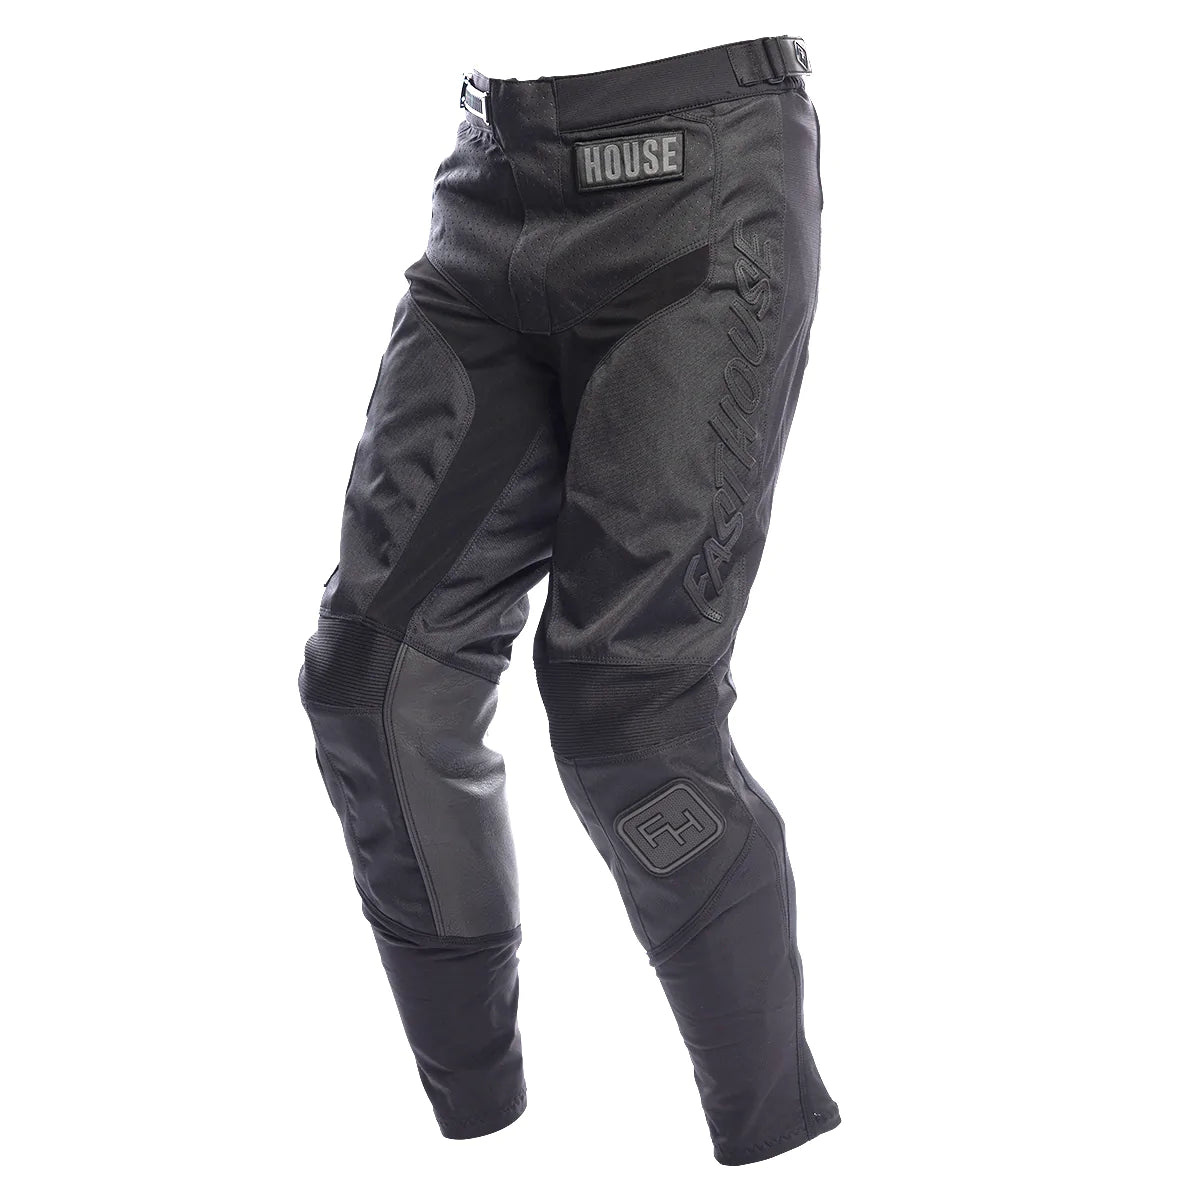 Grindhouse 805 Growler Pant